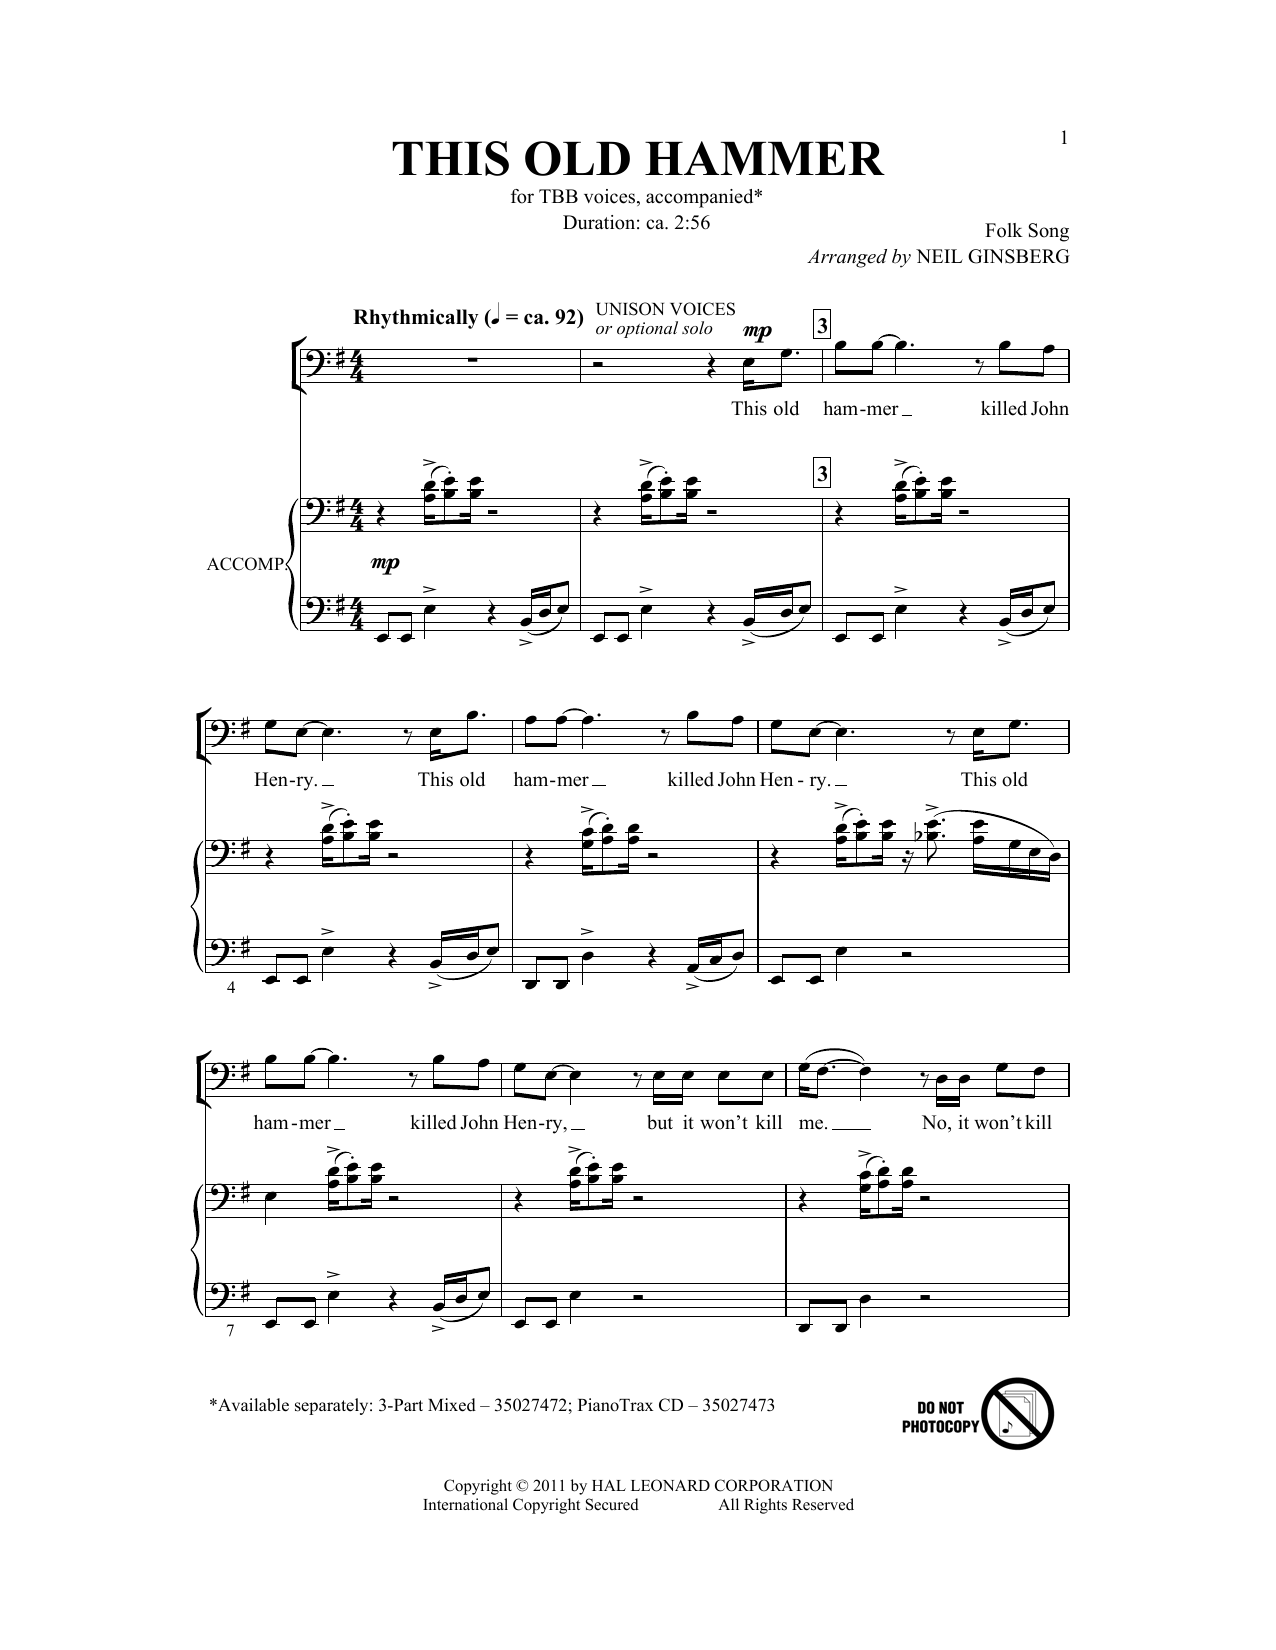 Download Neil Ginsberg This Old Hammer Sheet Music